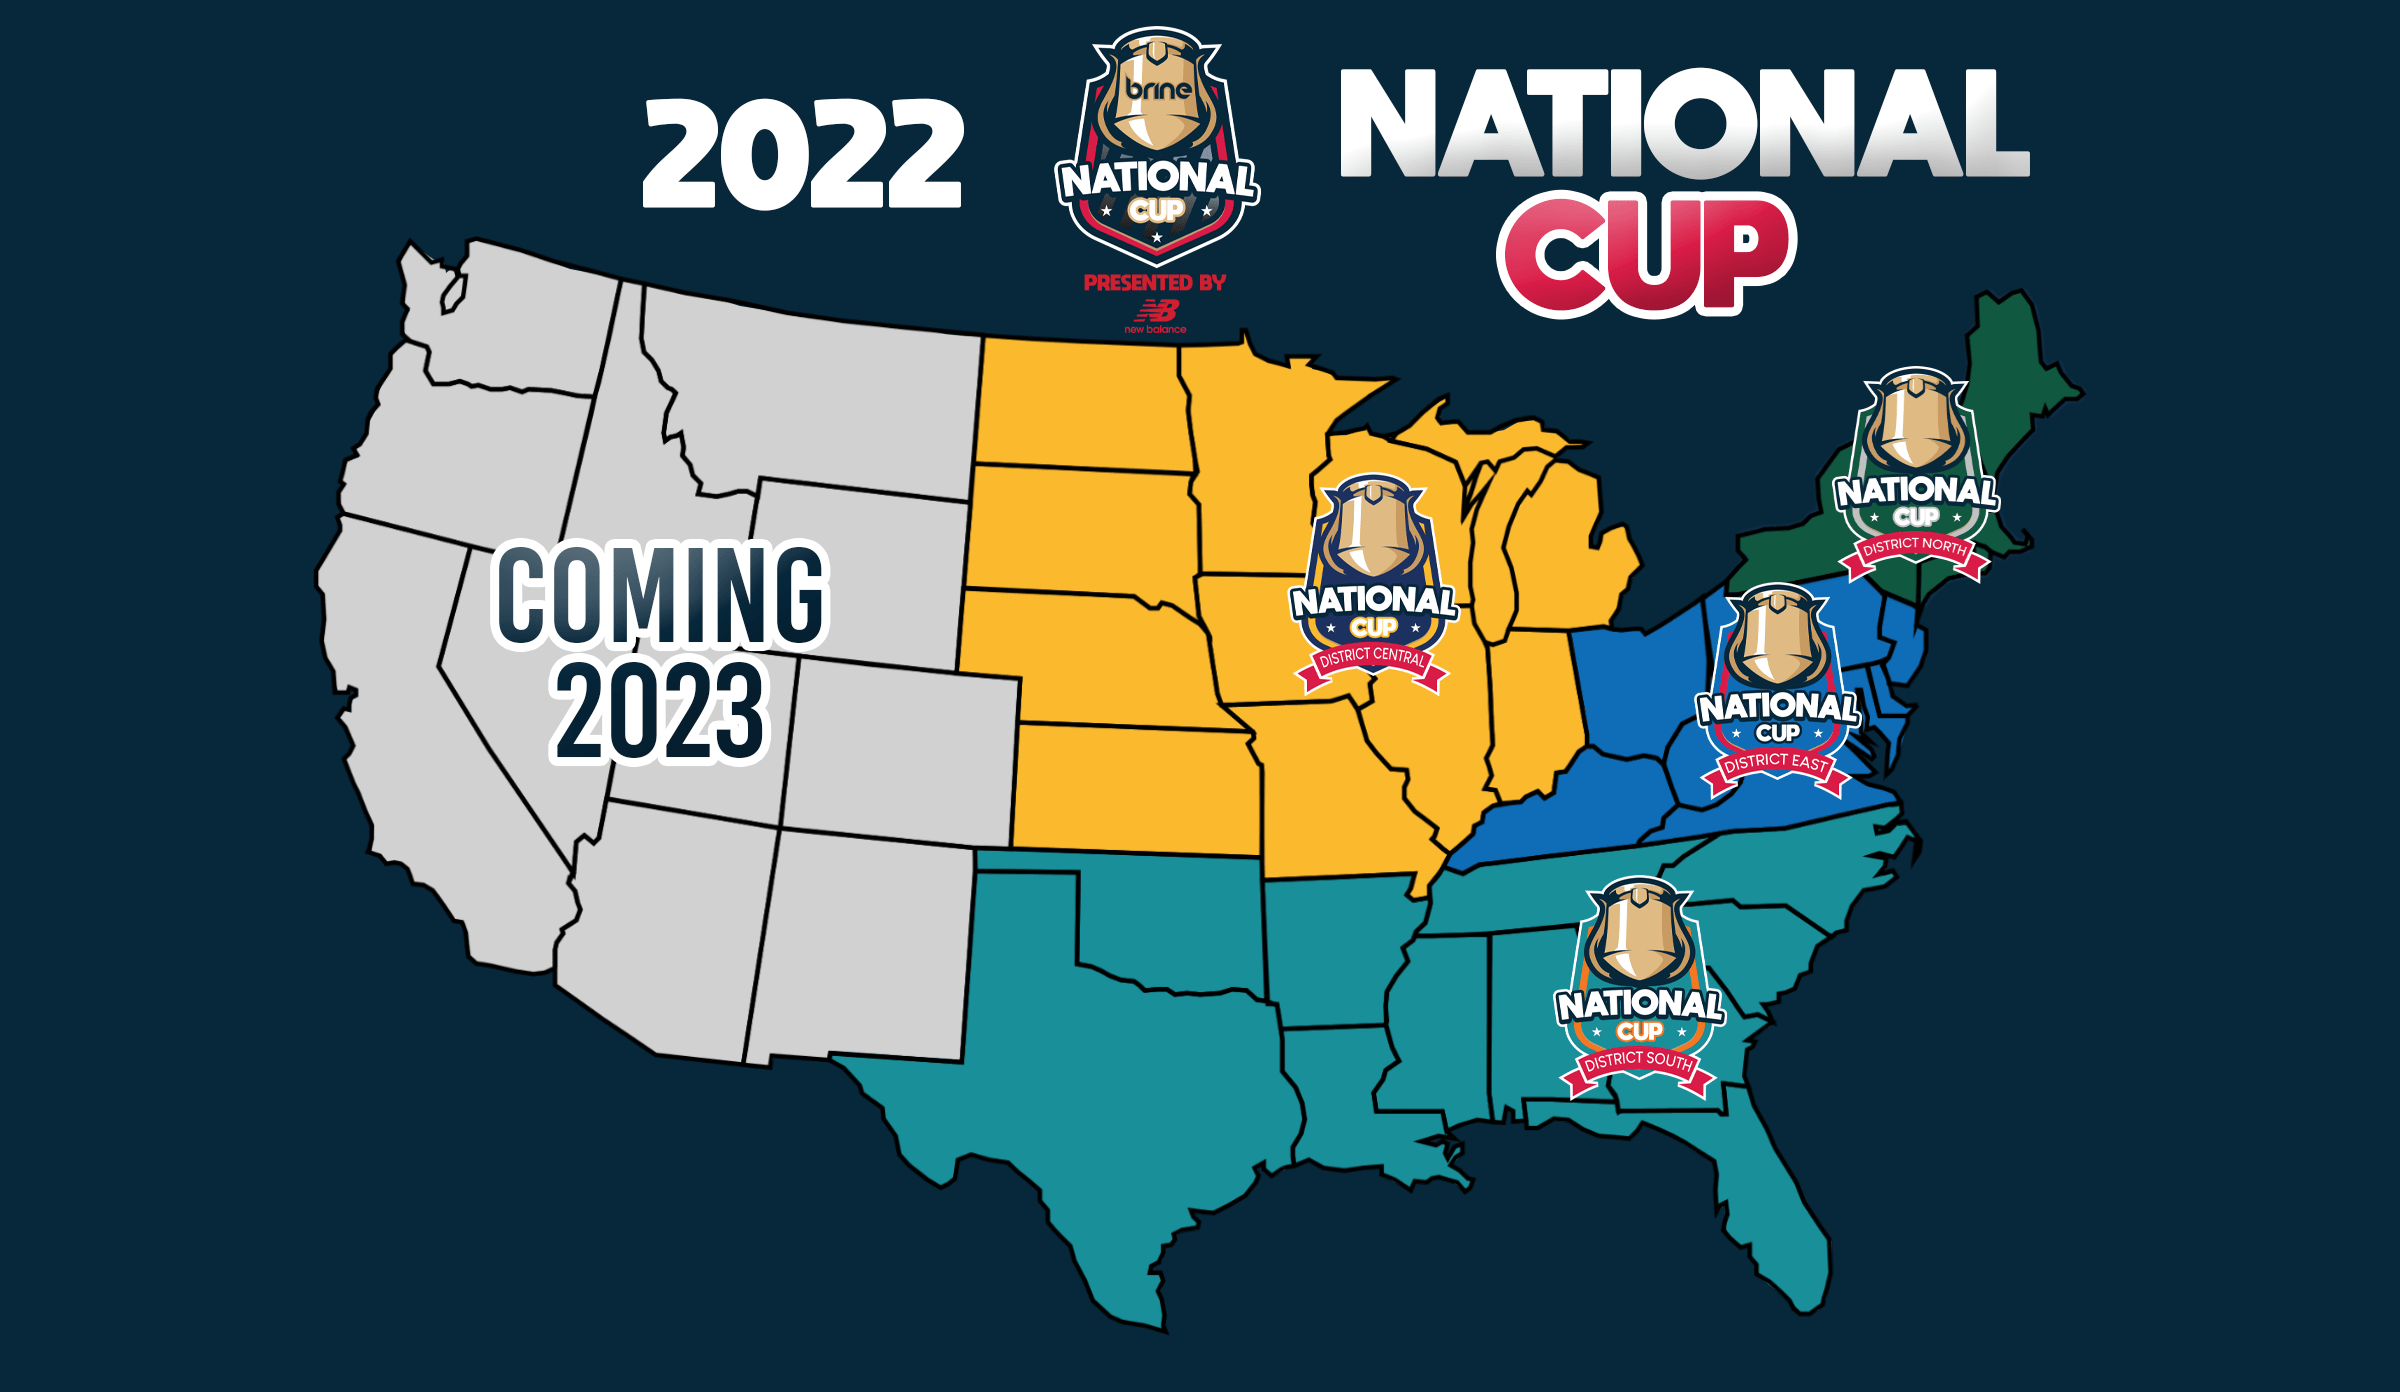 2022 National Cup Map